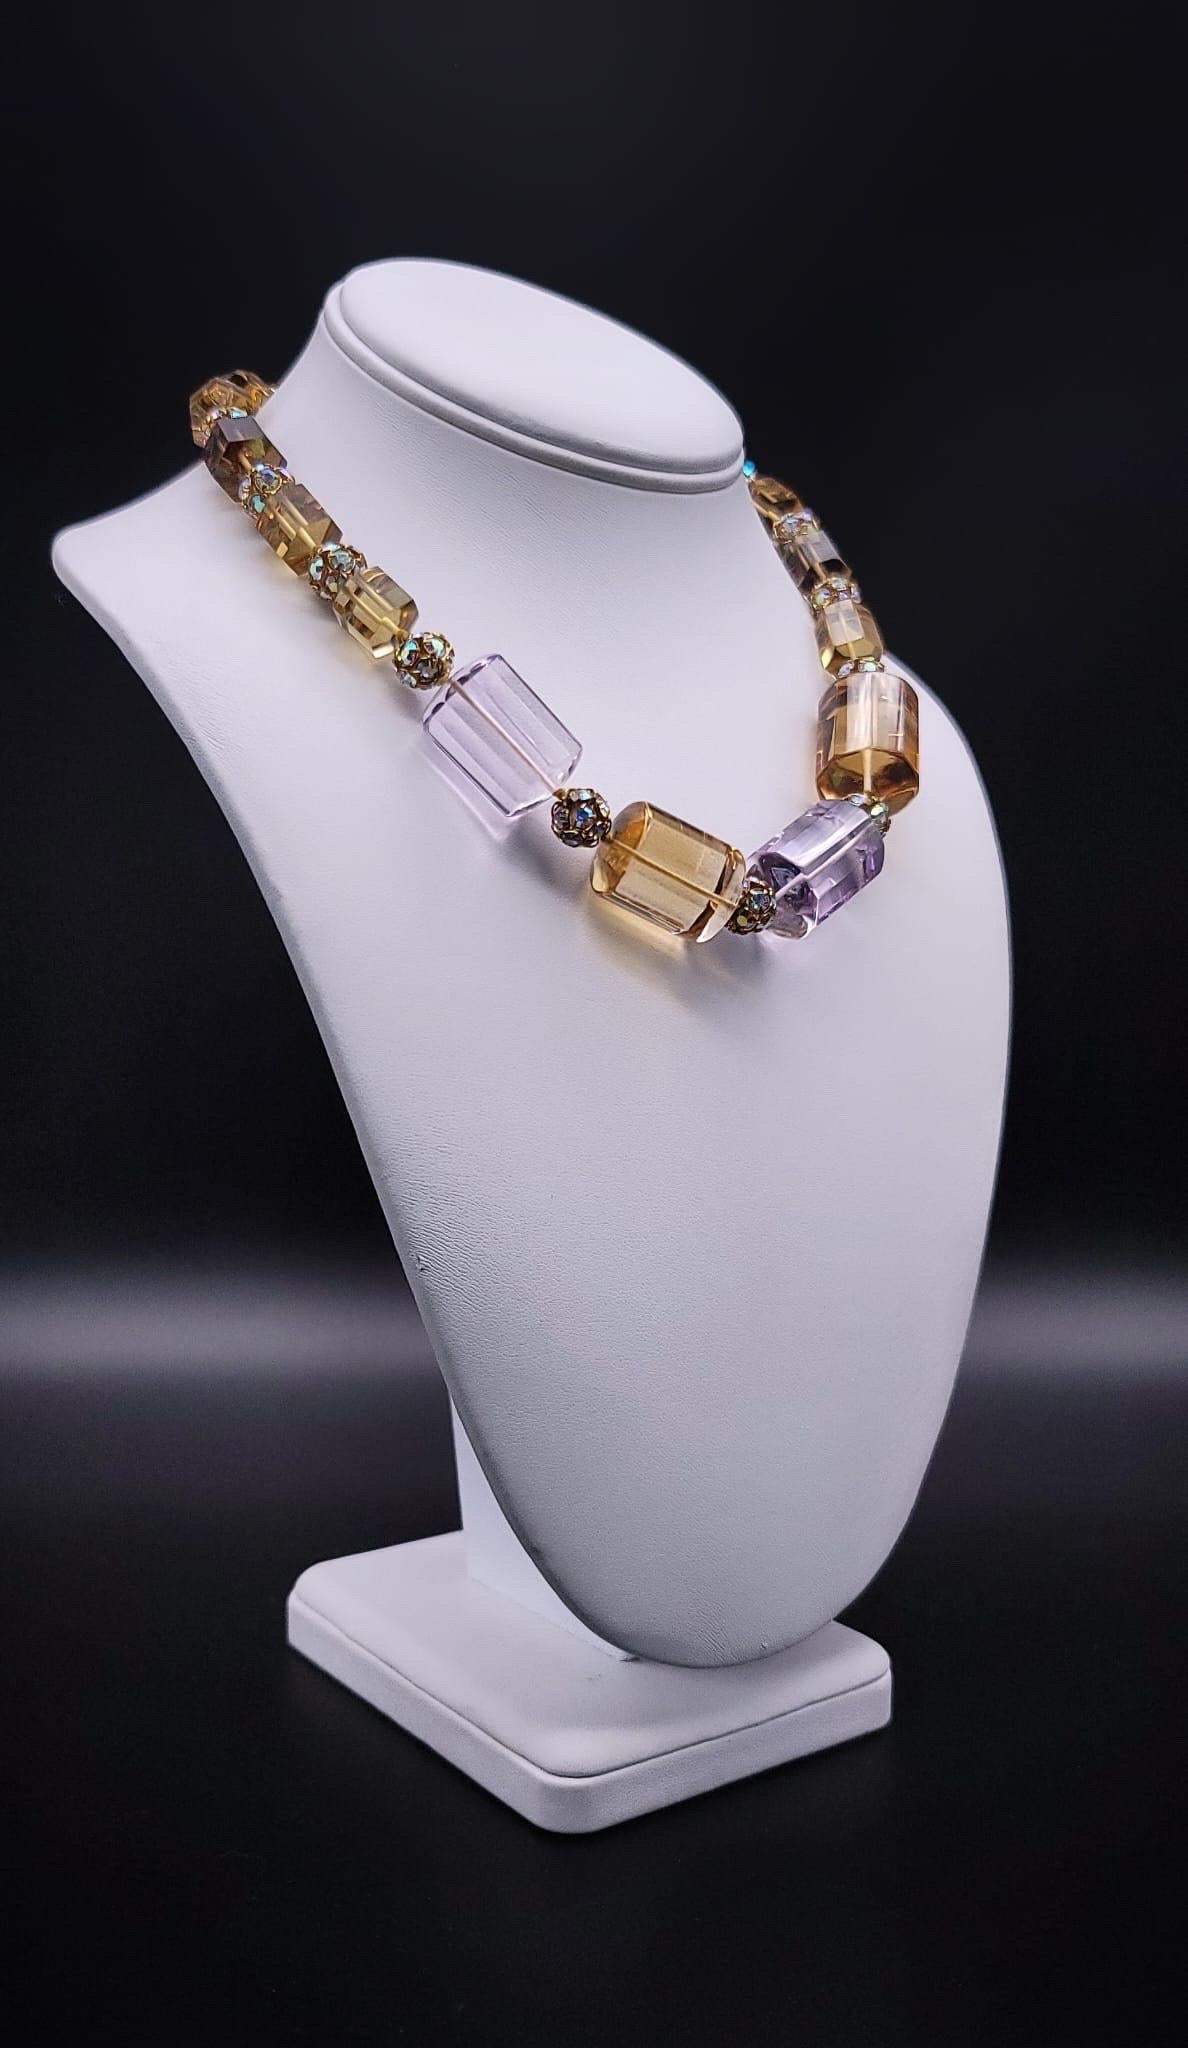 One-of-a-Kind

Precious necklace Purple Amethyst, Topaz Citrine cylindrical, Brazilian cut graduated stones separated by vermeil 22k over sterling silver spacers, held by smoky quartz and vermeil clasp. The Quartz is very clear and presents a soft